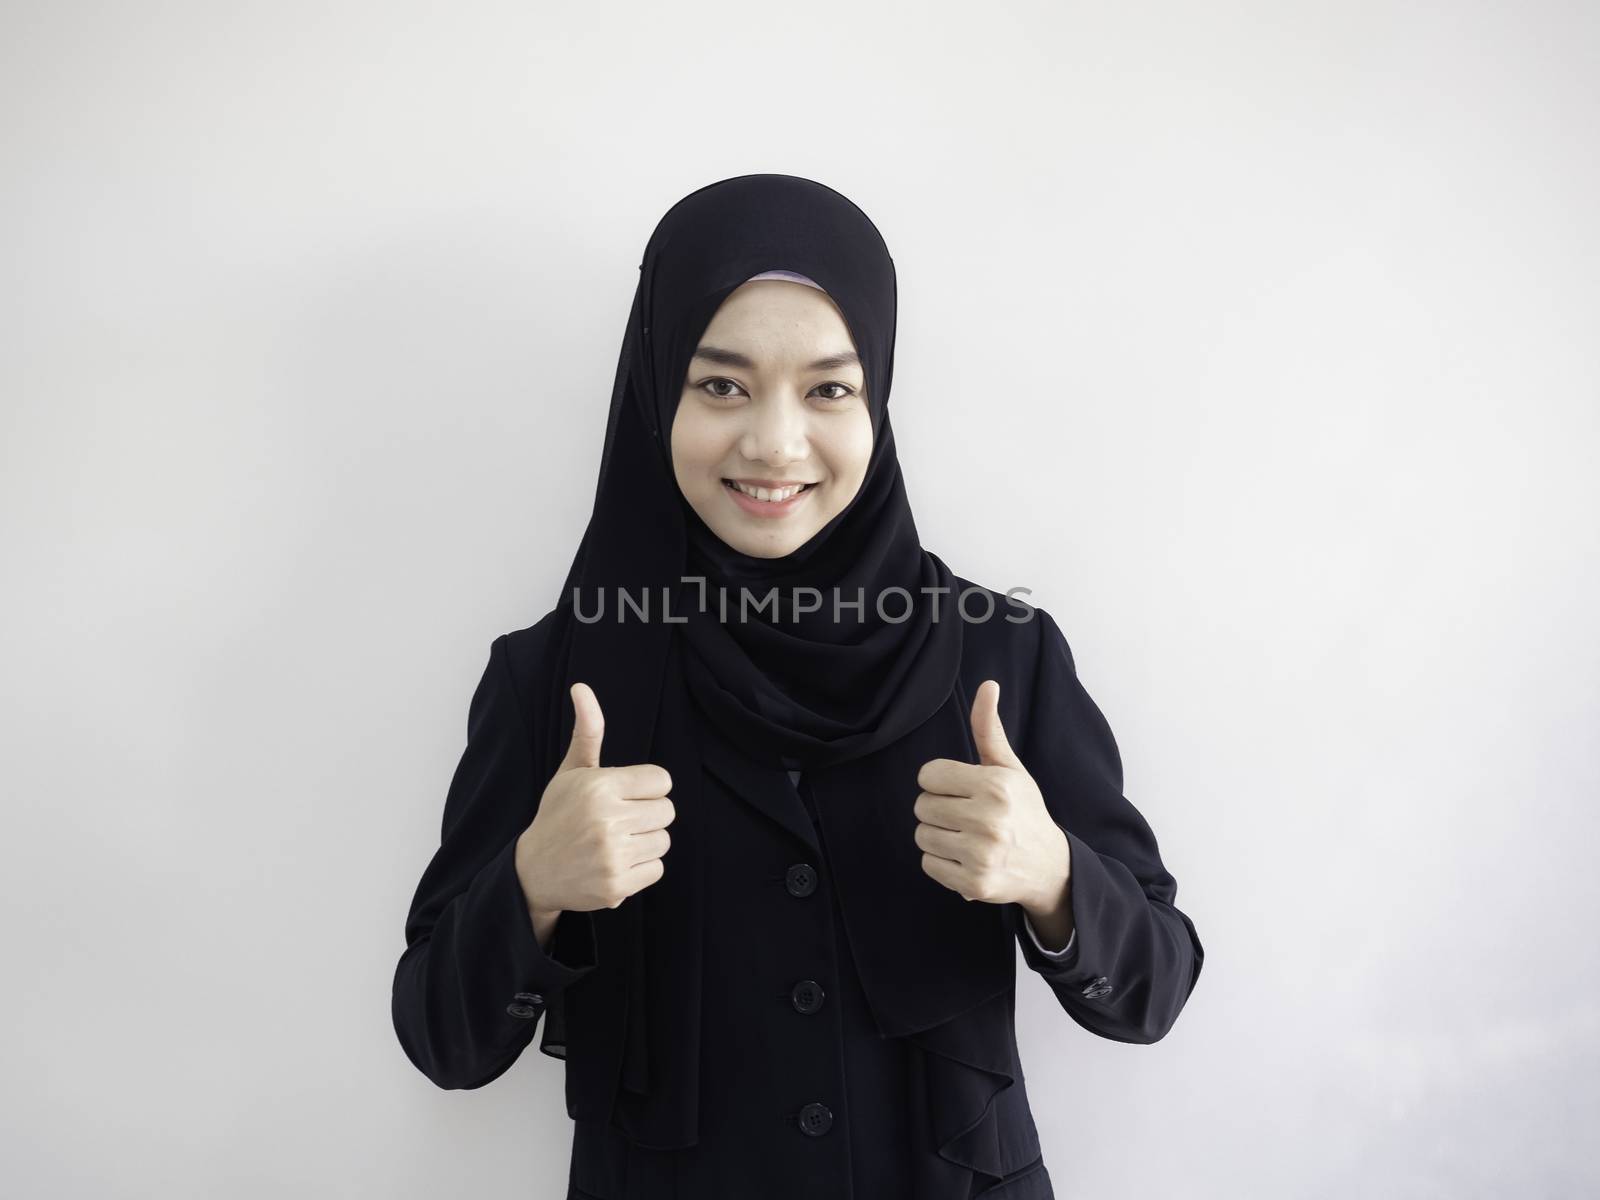 Isolated with clipping path. Smart beautiful Asian Muslim woman in modern kurung and hijab. Positive human emotion facial expression body language.